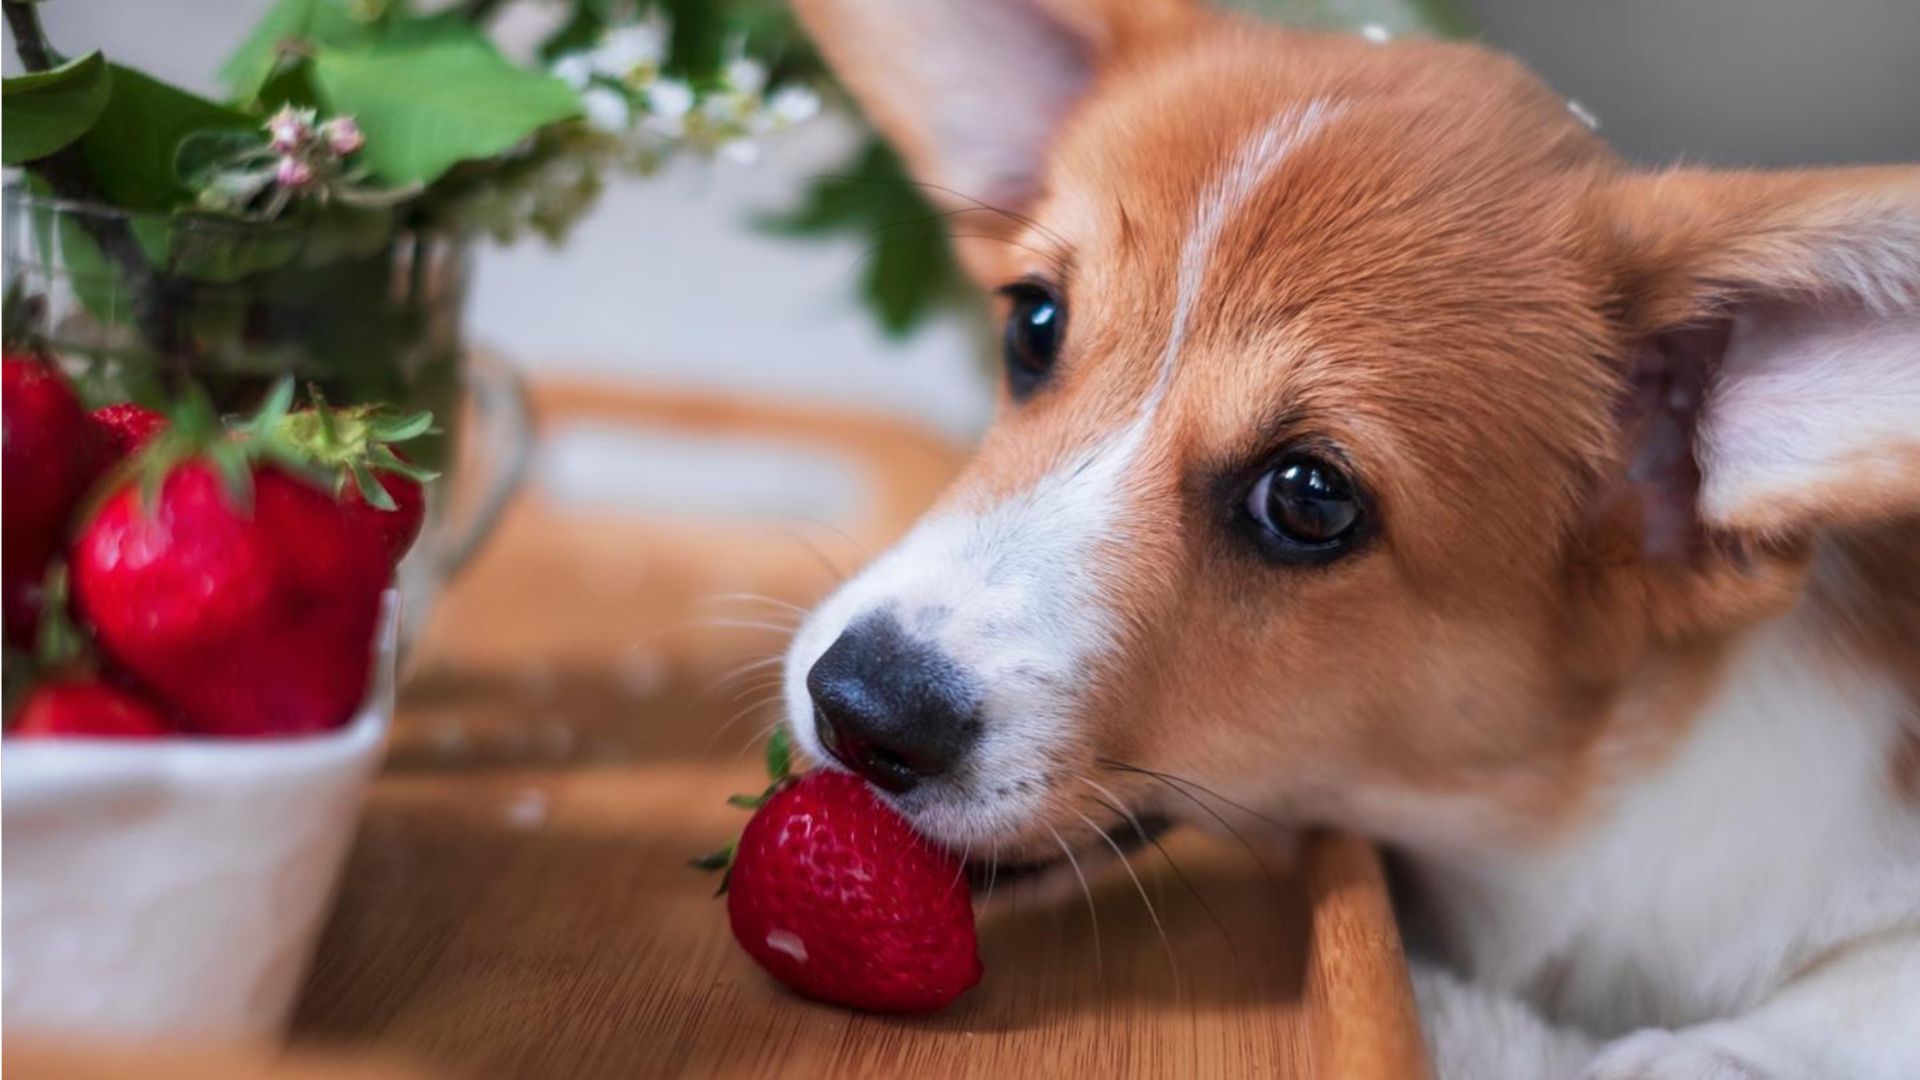 Can dogs eat strawberries? You should know